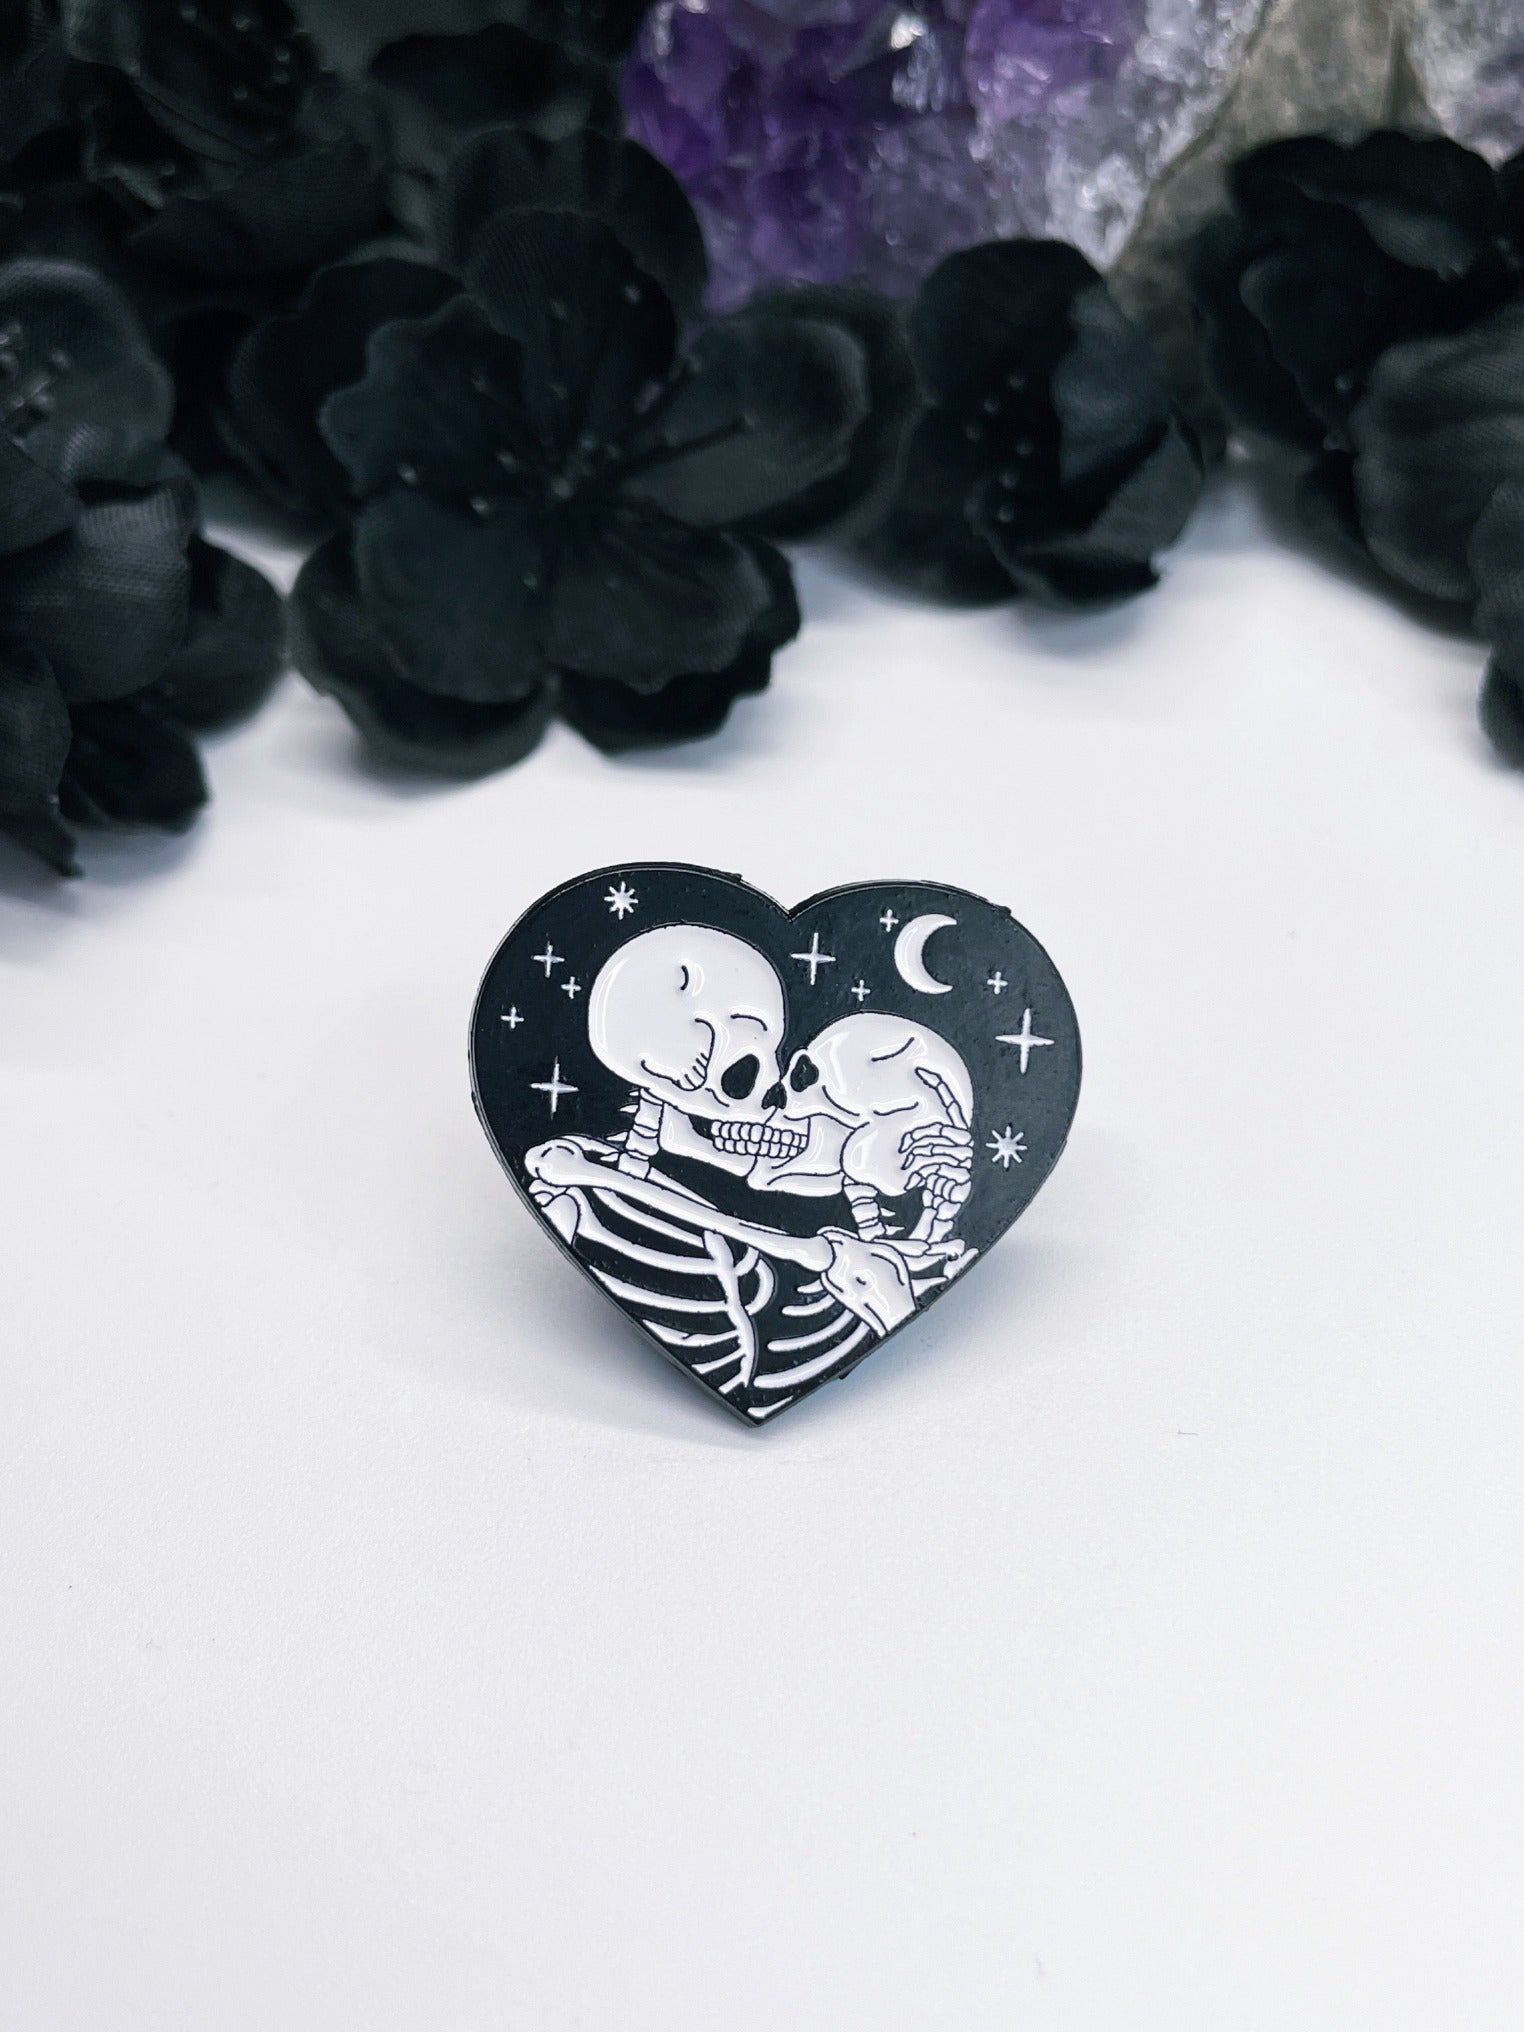 Pictured is an enamel pin of two skeletons kissing inside a heart.